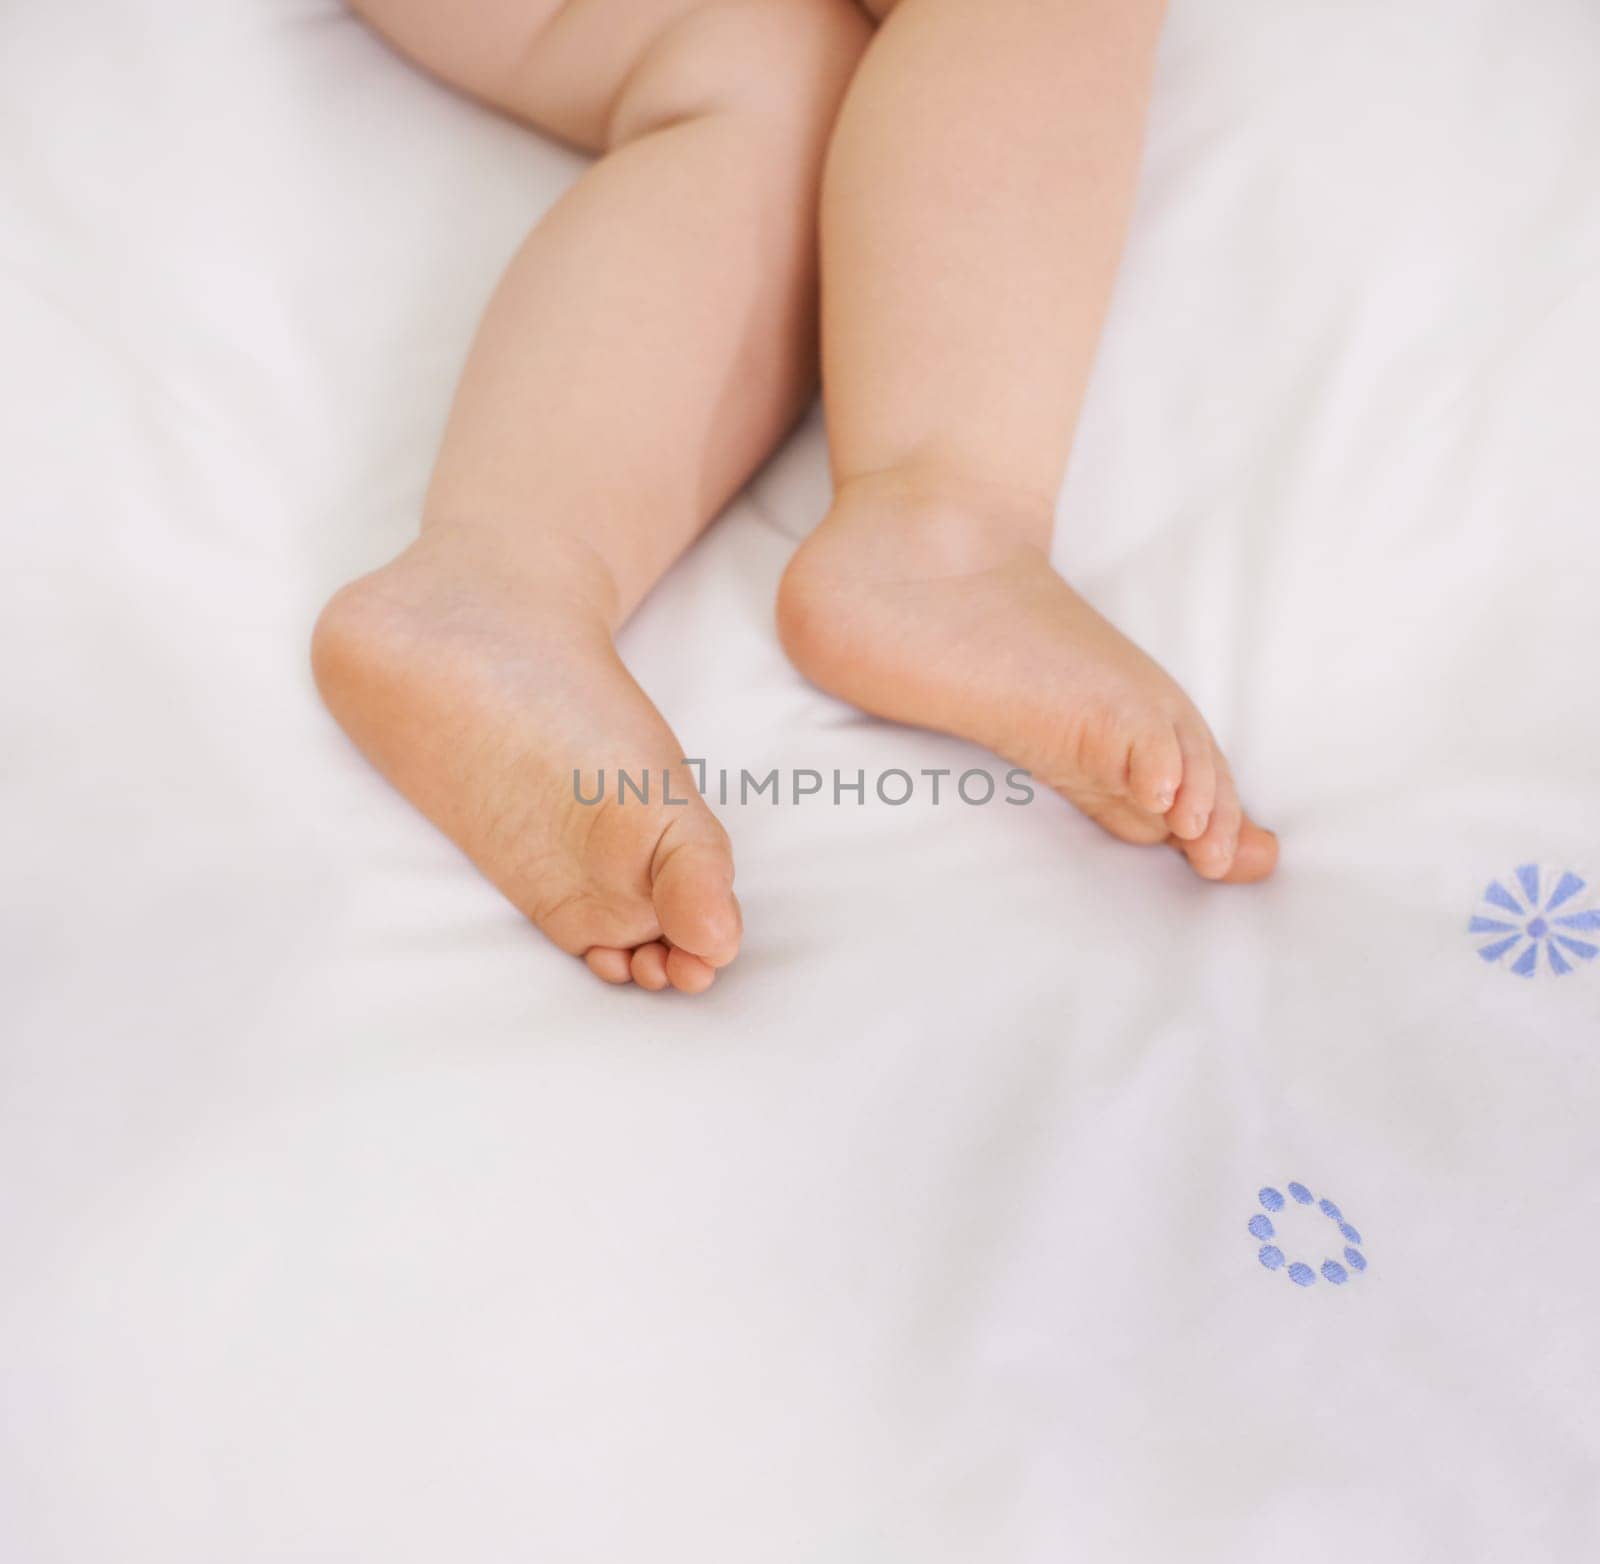 Baby sleeping, feet and top view on bed to relax, comfort and calm at home on mockup space. Toddler, above and closeup of cute foot, legs of adorable child and young kid resting in peace in bedroom.